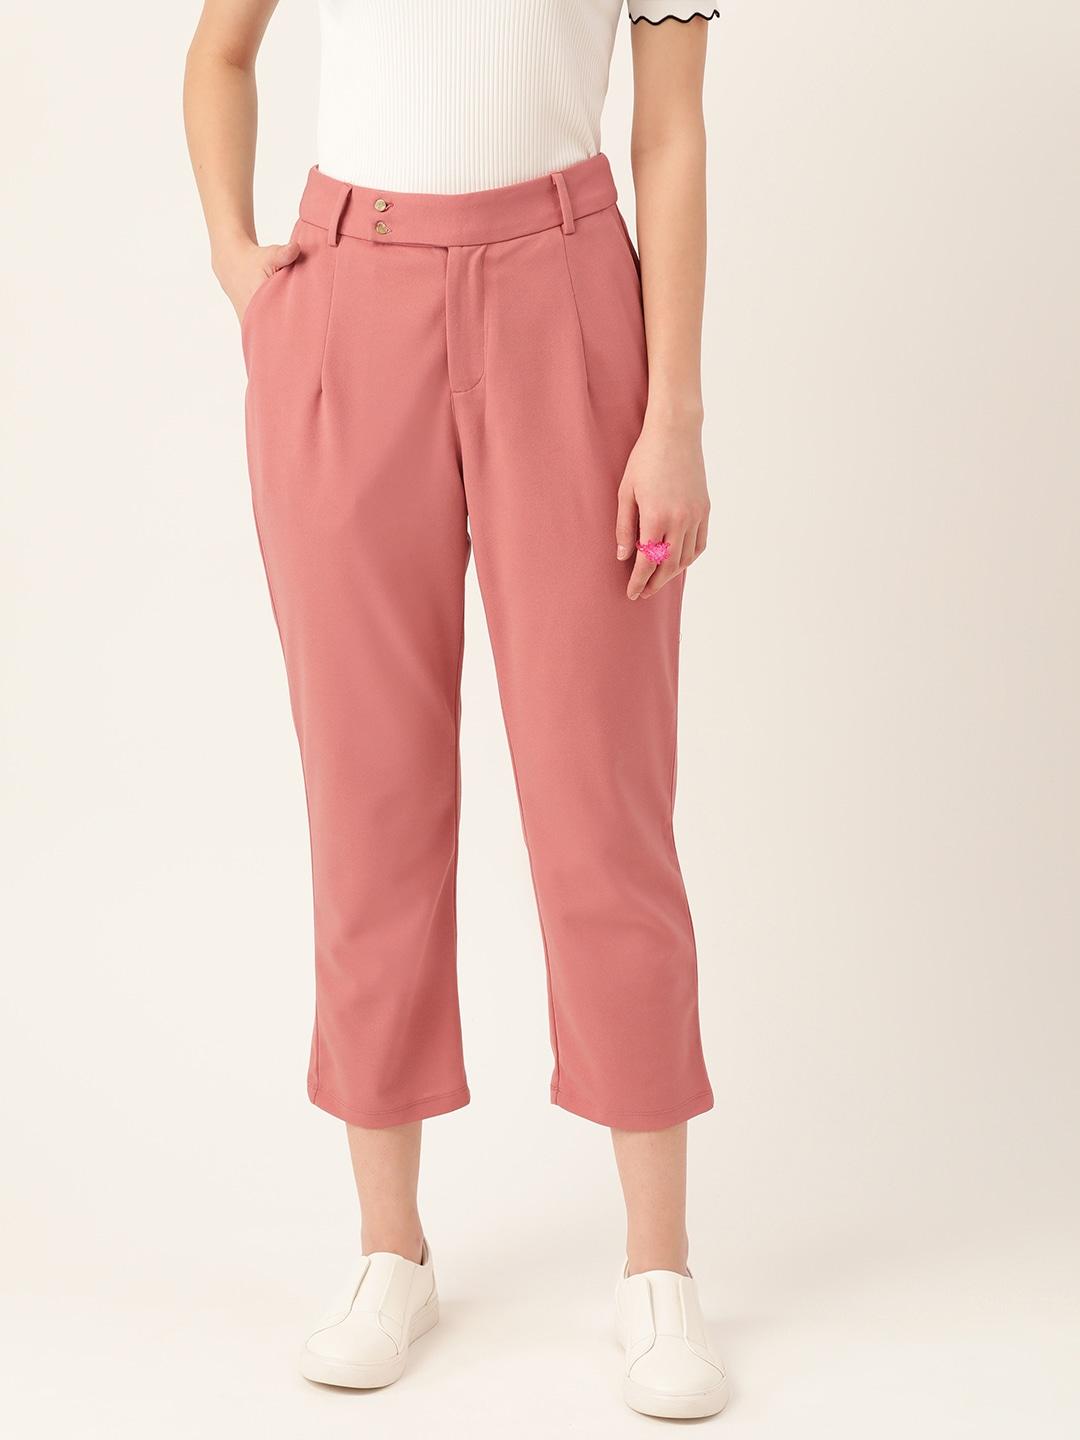 dressberry-women-pink-high-rise-trousers